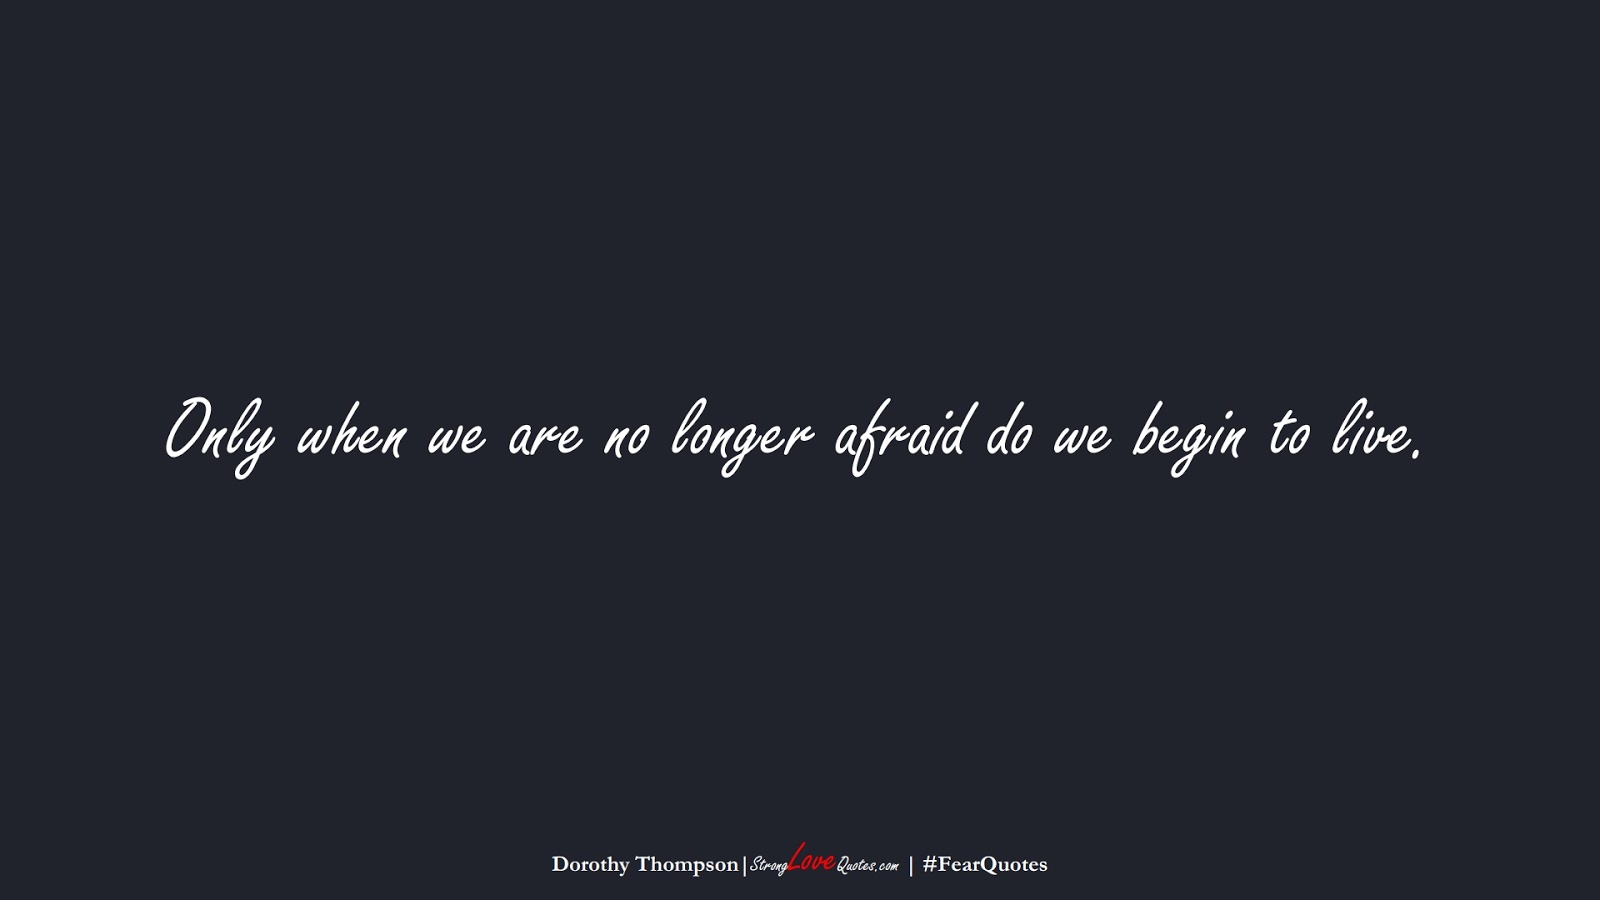 Only when we are no longer afraid do we begin to live. (Dorothy Thompson);  #FearQuotes